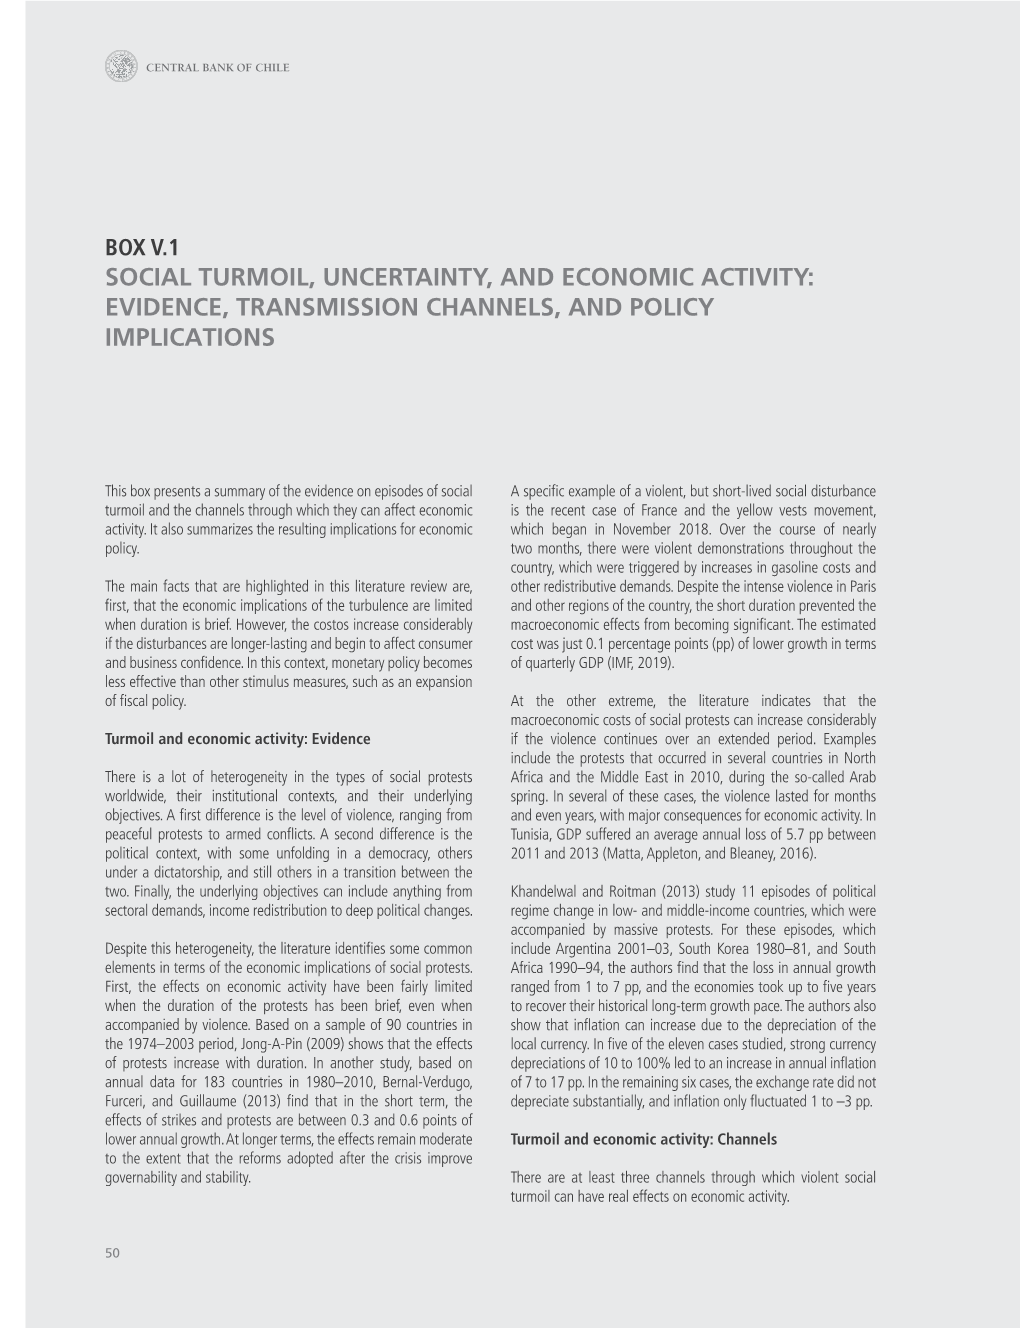 Social Turmoil, Uncertainty, and Economic Activity: Evidence, Transmission Channels, and Policy Implications